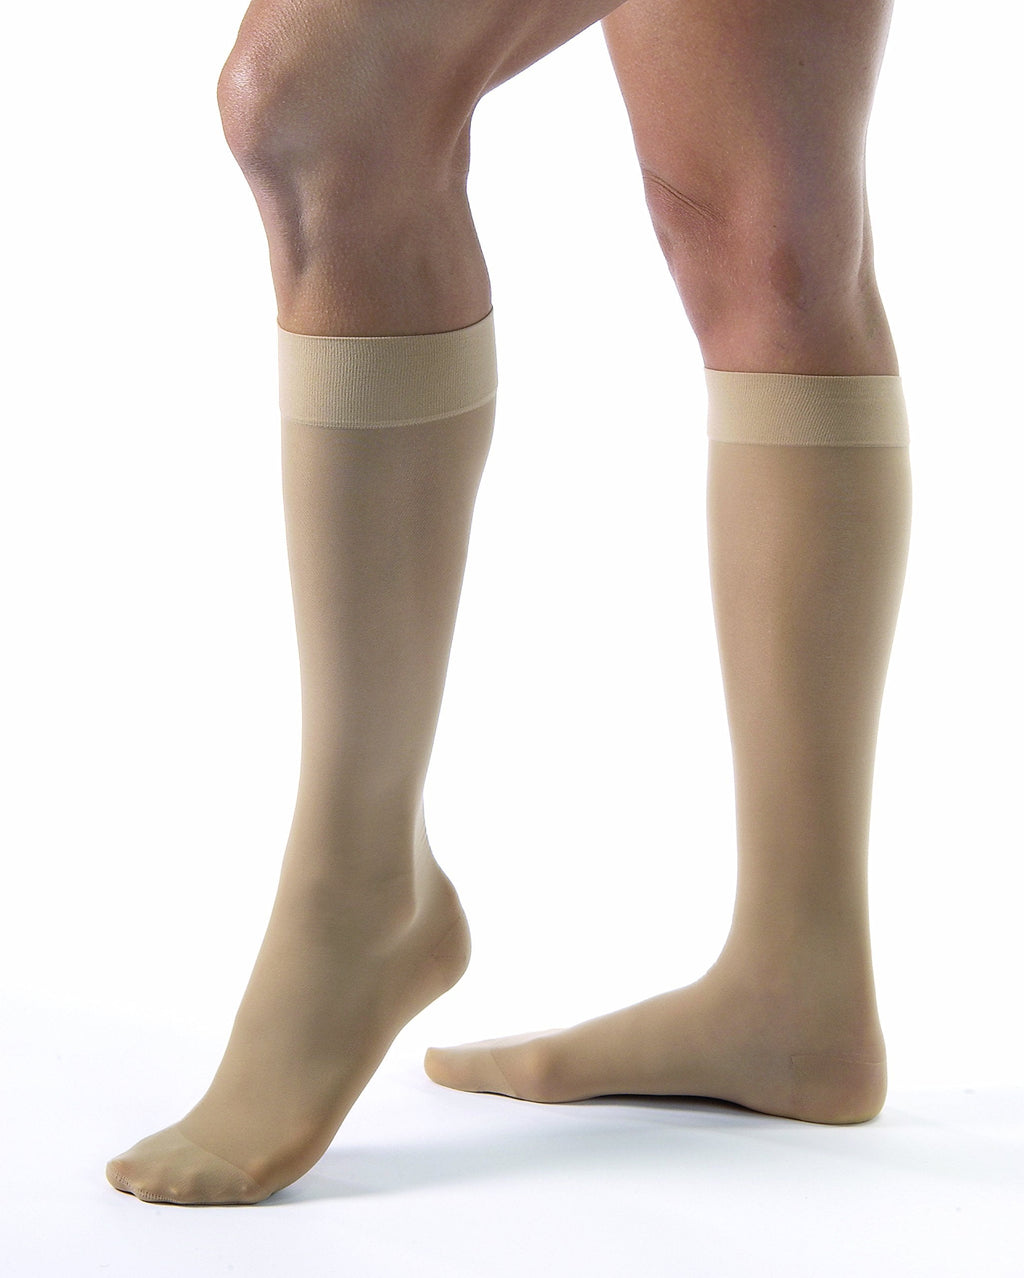 [Australia] - JOBST UltraSheer Knee High with SoftFit Technology Band, 15-20 mmHg Compression Stockings, Closed Toe, X-Large, Natural X-Large (1 Pair) 